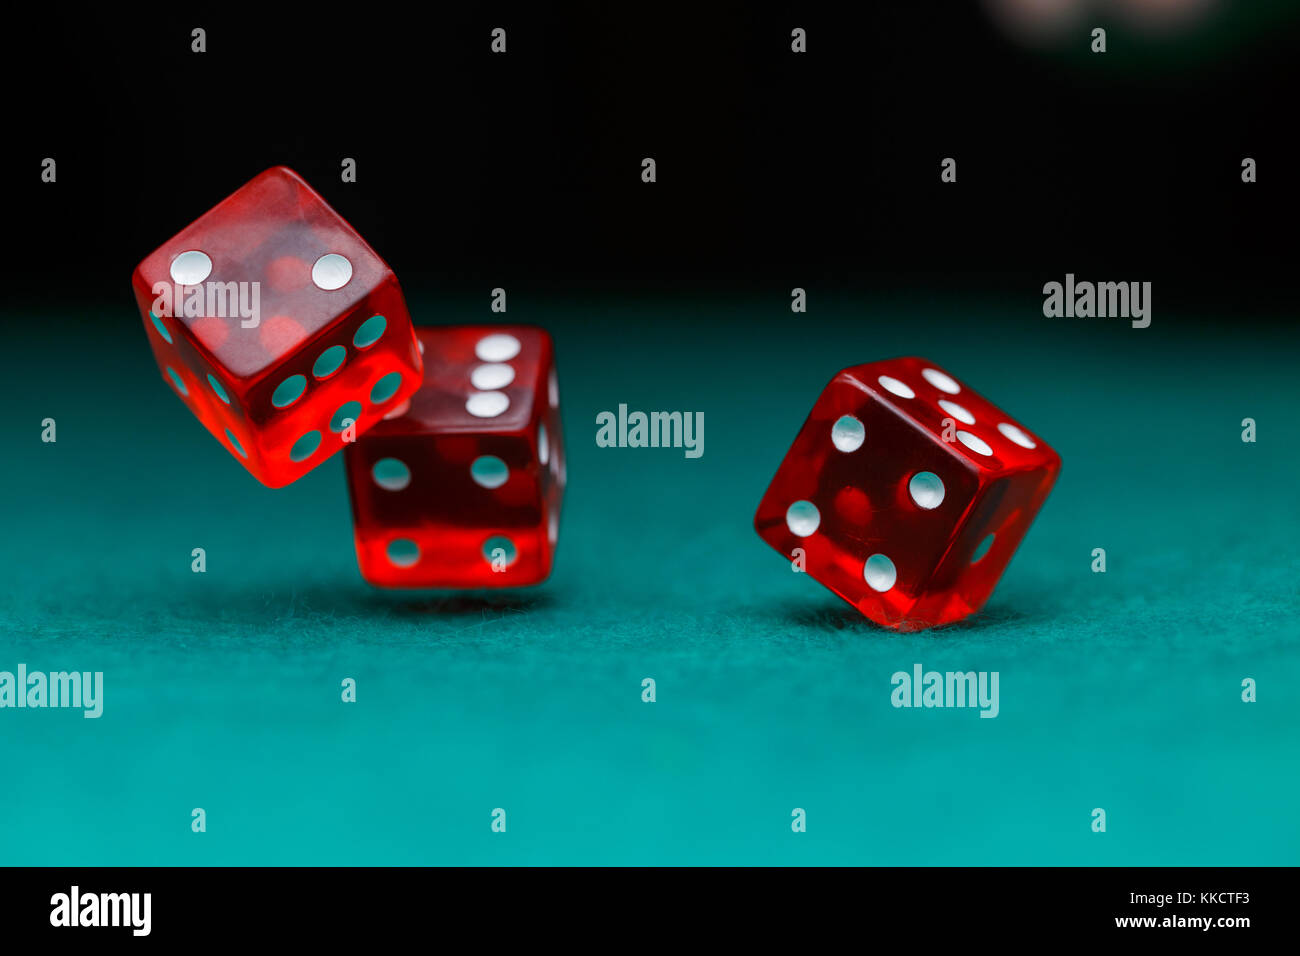 Image of several red dice falling on green table on black background Stock Photo